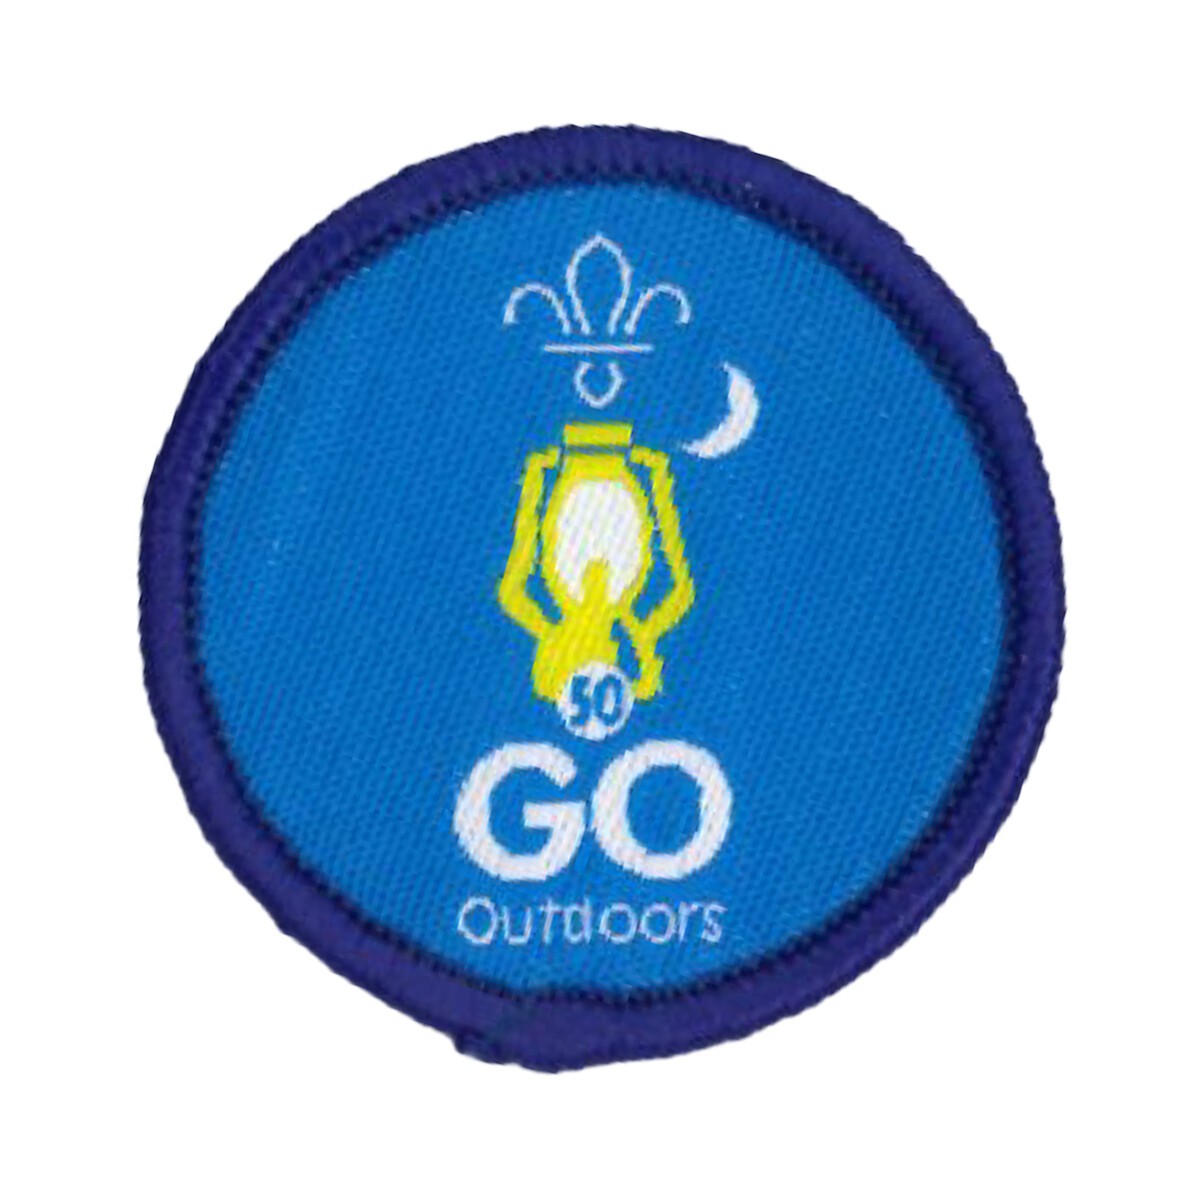 Nights Away Stage 50 Activity Badge (Go Outdoors)-